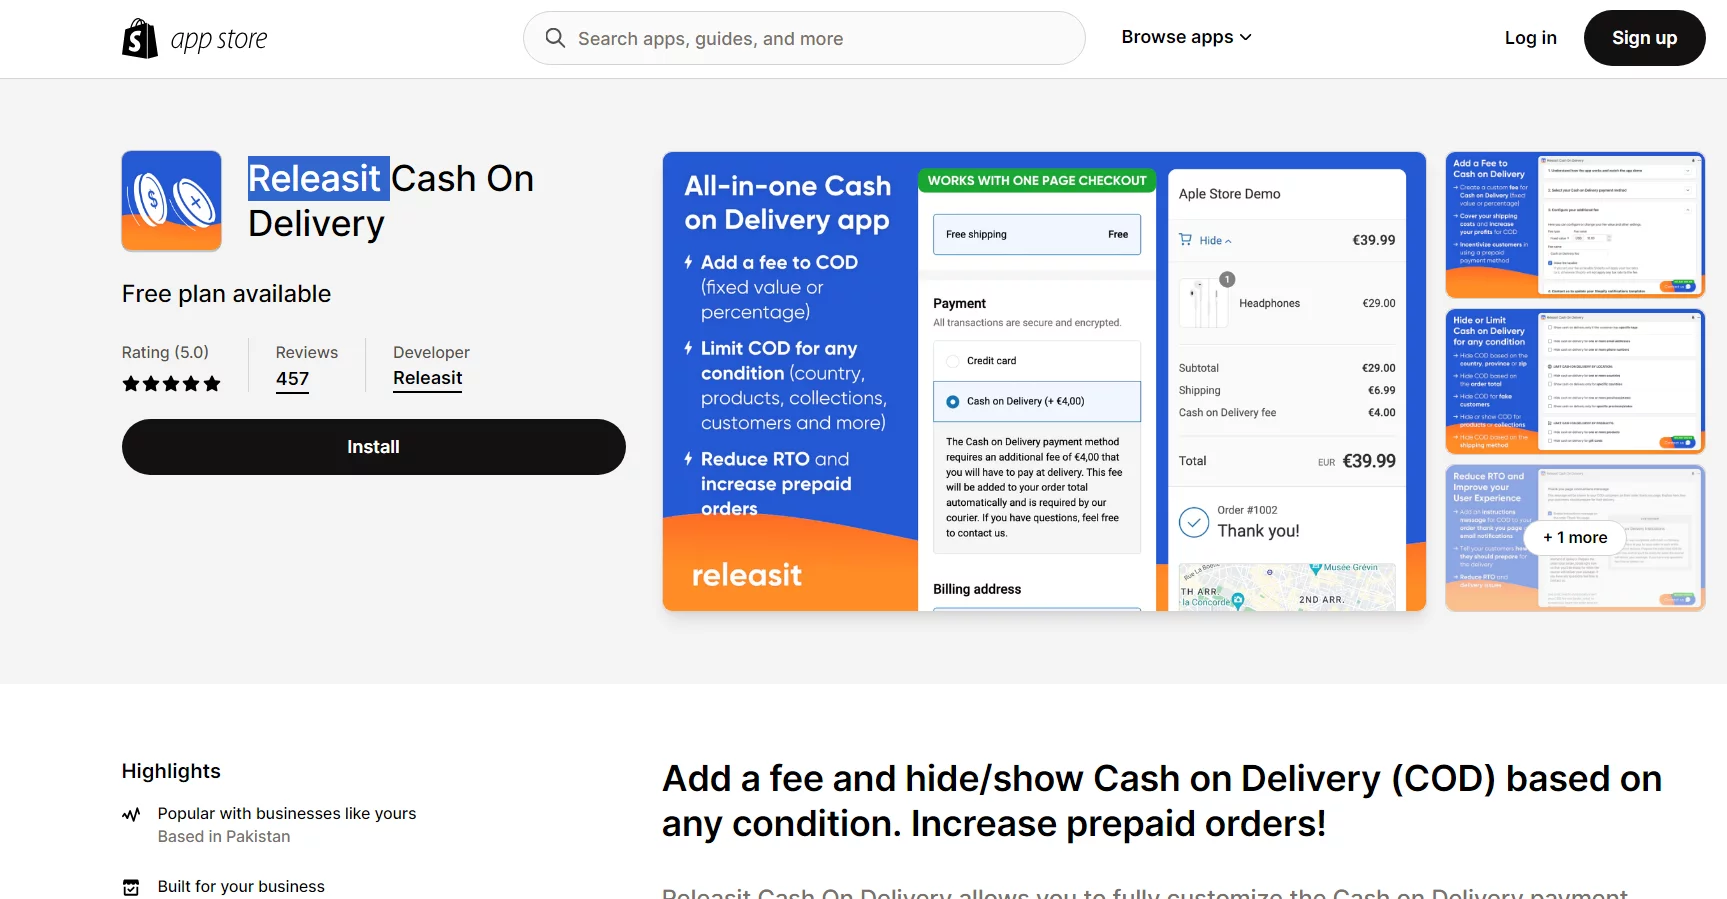 Releasit Cash On Delivery